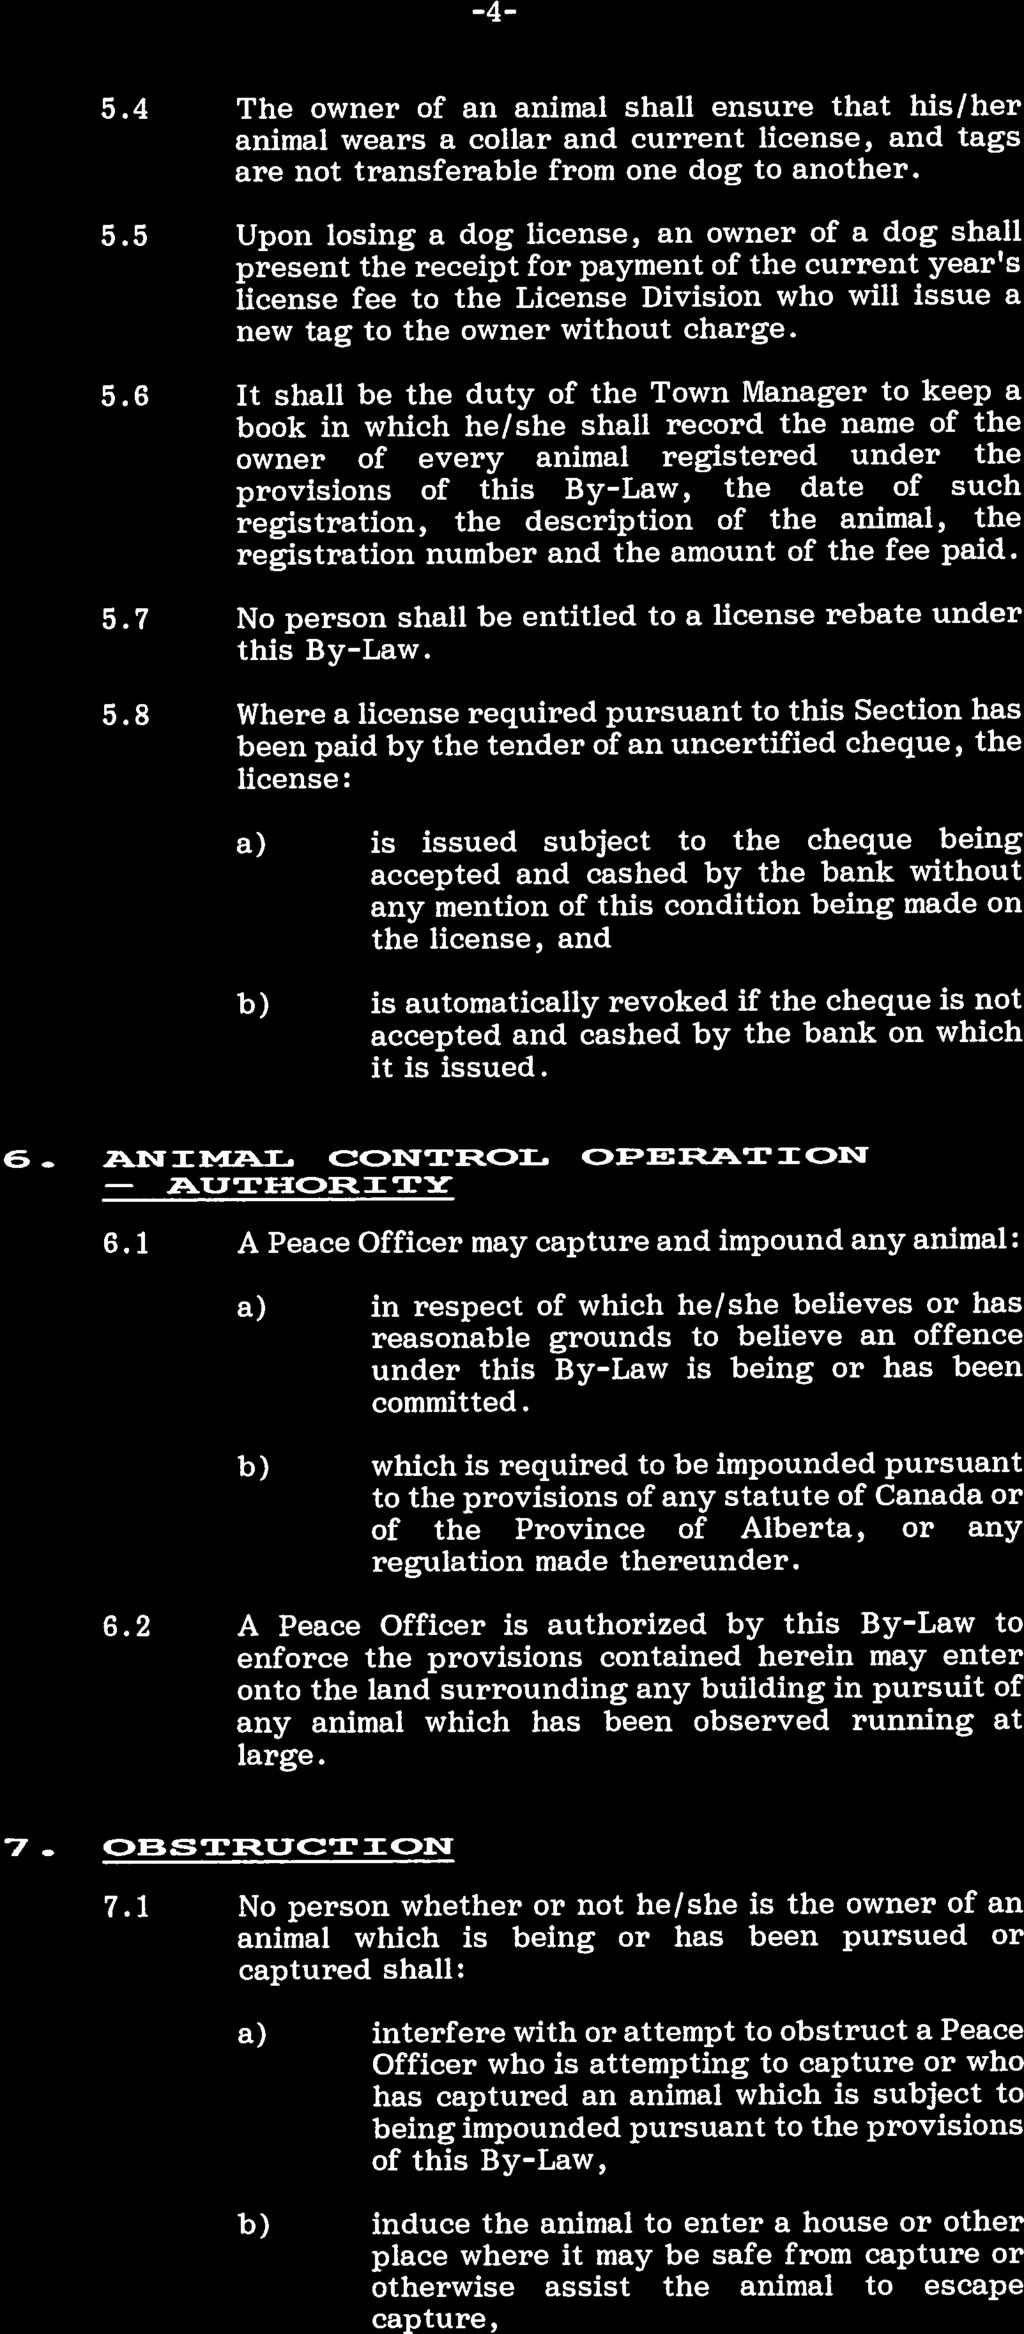 -4-5.4 The owner of an animal shall ensure that his/her animal wears a collar and current license, and tags are not transferable from one dog to another. 5.